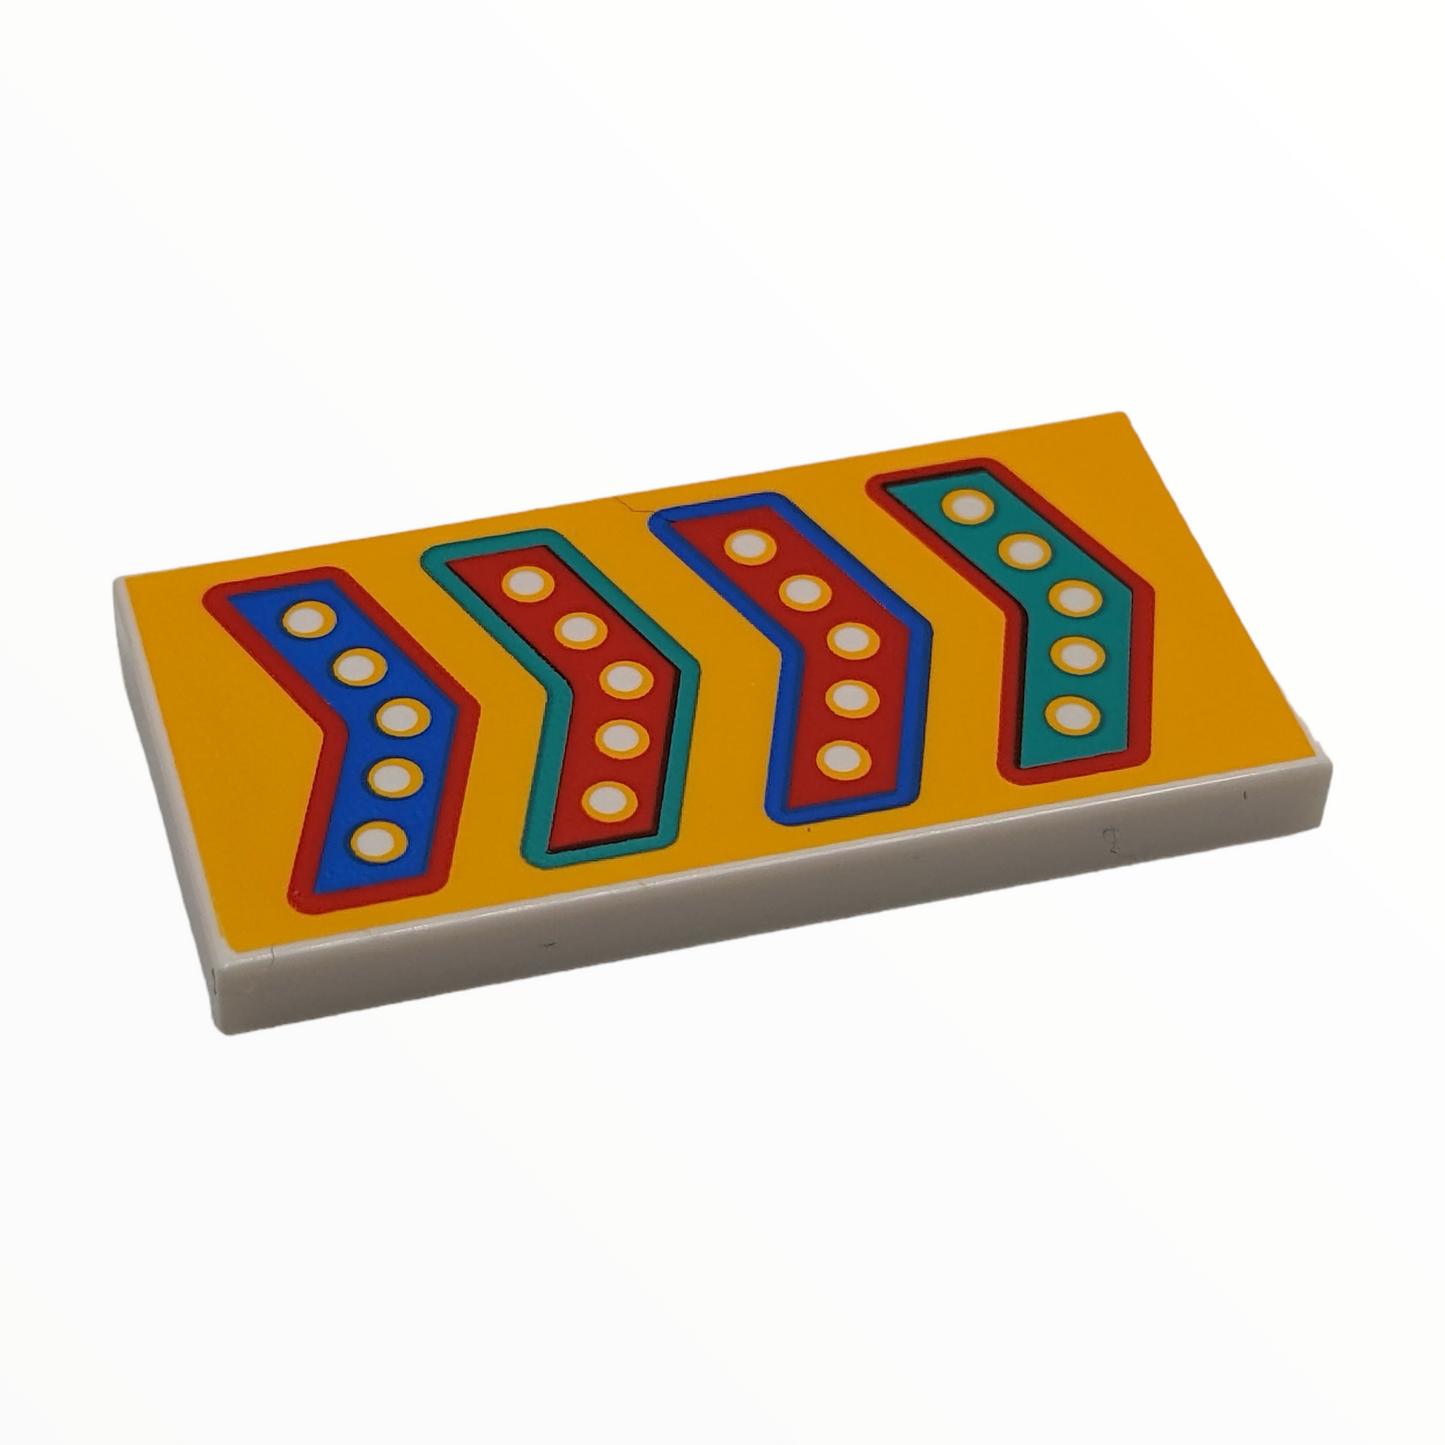 LEGO Tile 2x4 - Red, Blue, and Dark Turquoise Arrows on Bright Light Orange Background